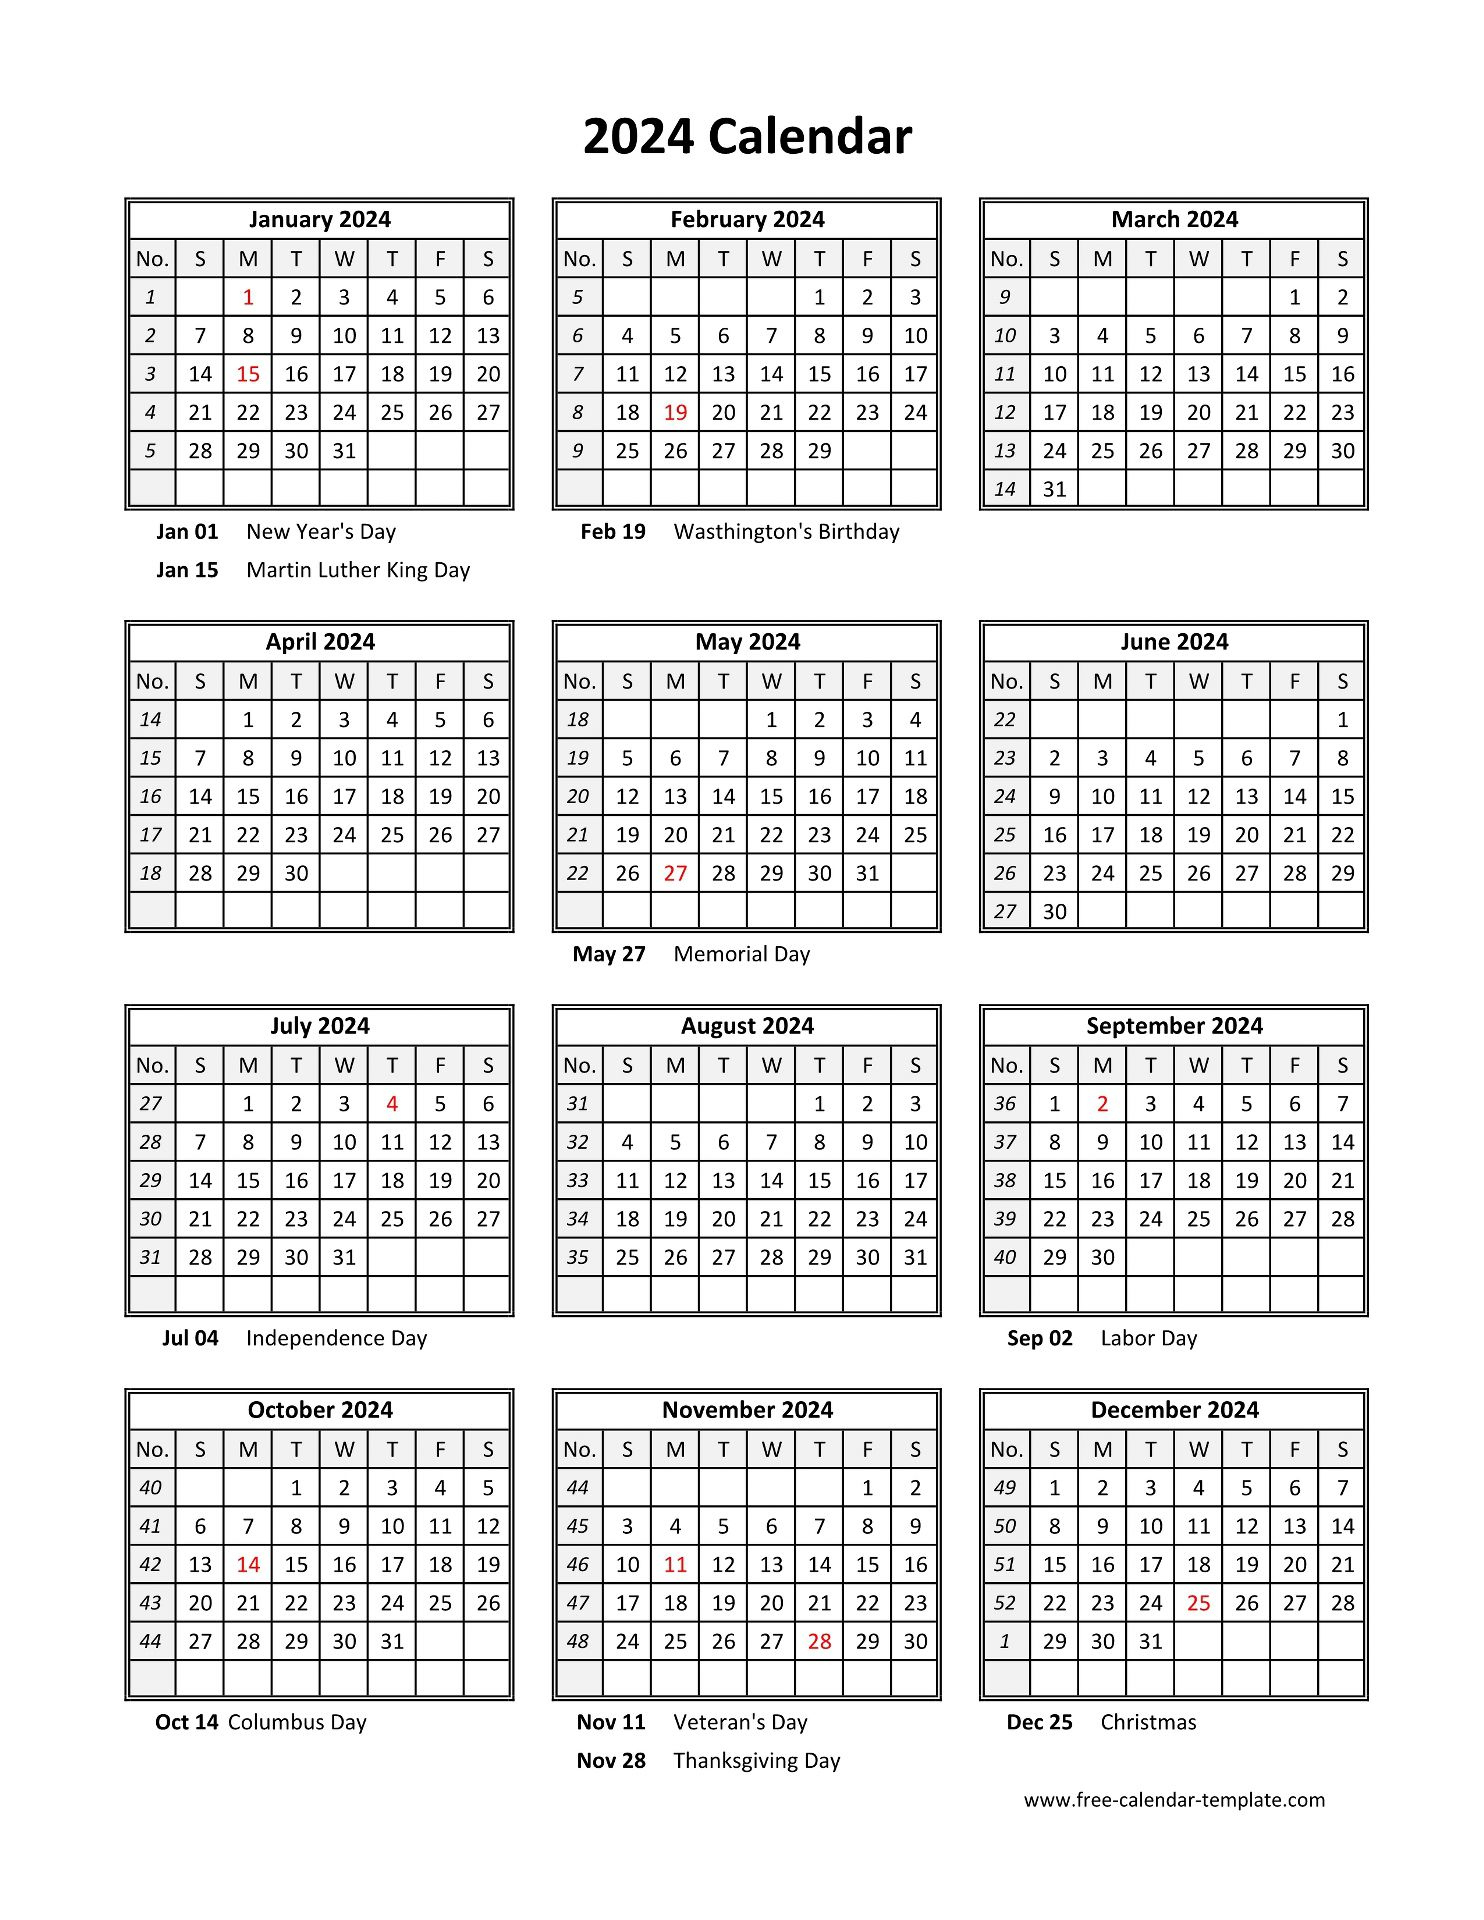 Yearly Printable Calendar 2024 With Holidays | Free-Calendar | 2024 Yearly Calendar Printable Pdf Free Download